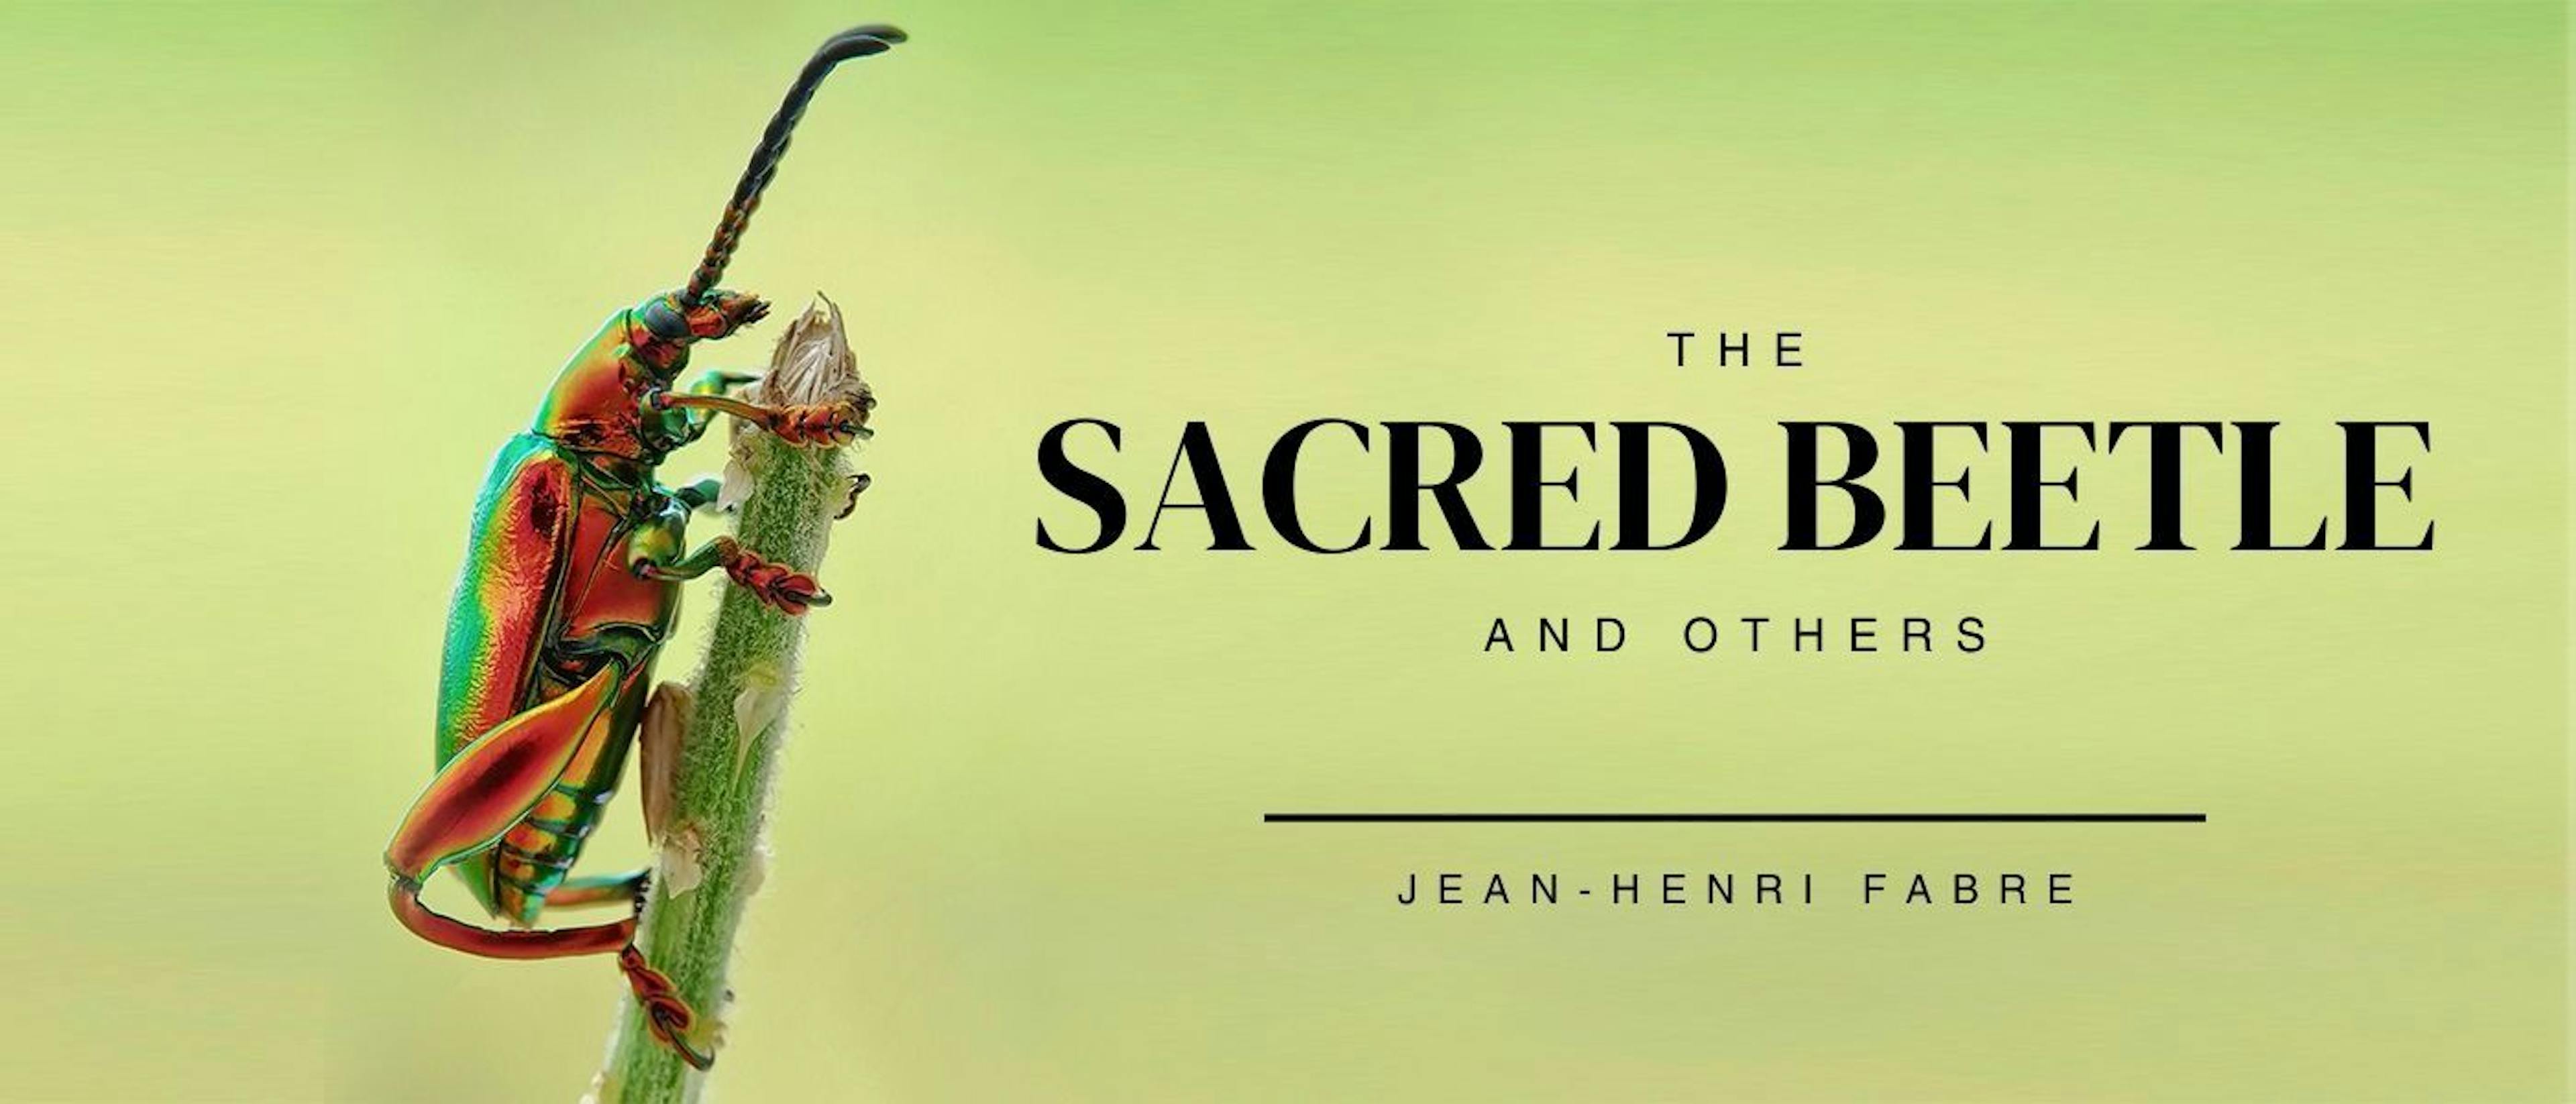 featured image - THE SACRED BEETLE IN CAPTIVITY